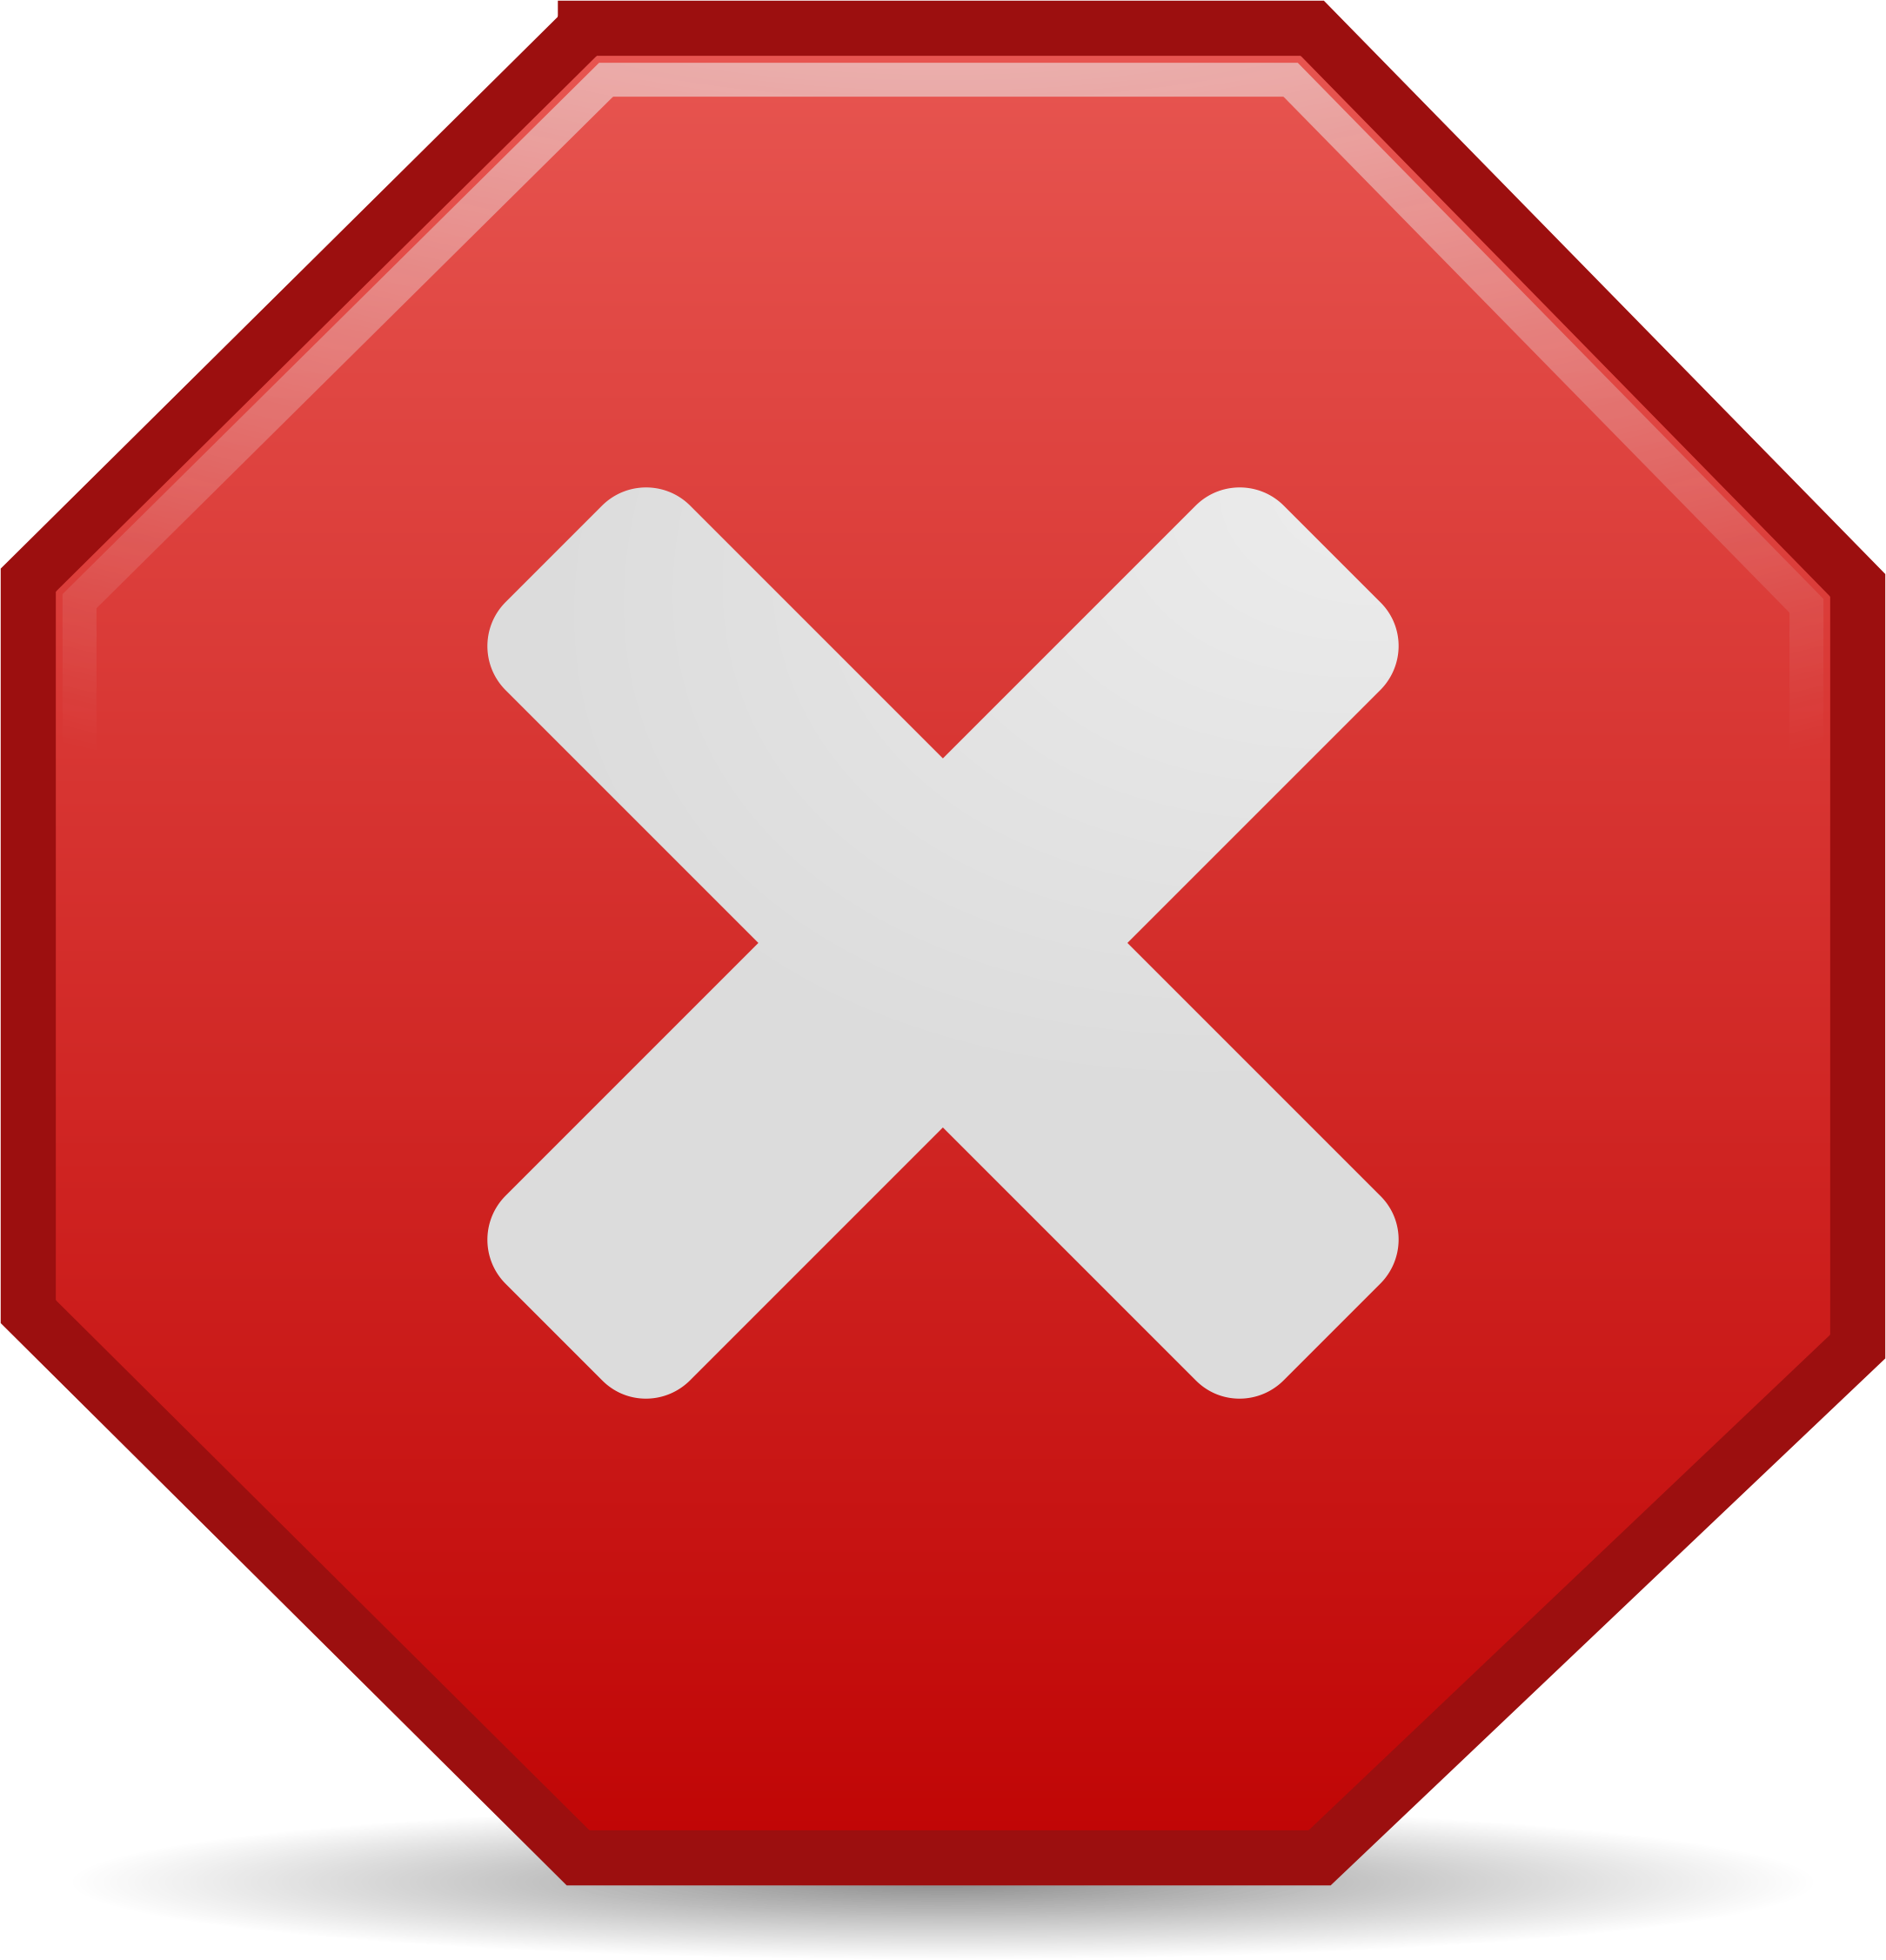 Delete Red X Button PNG Clipart